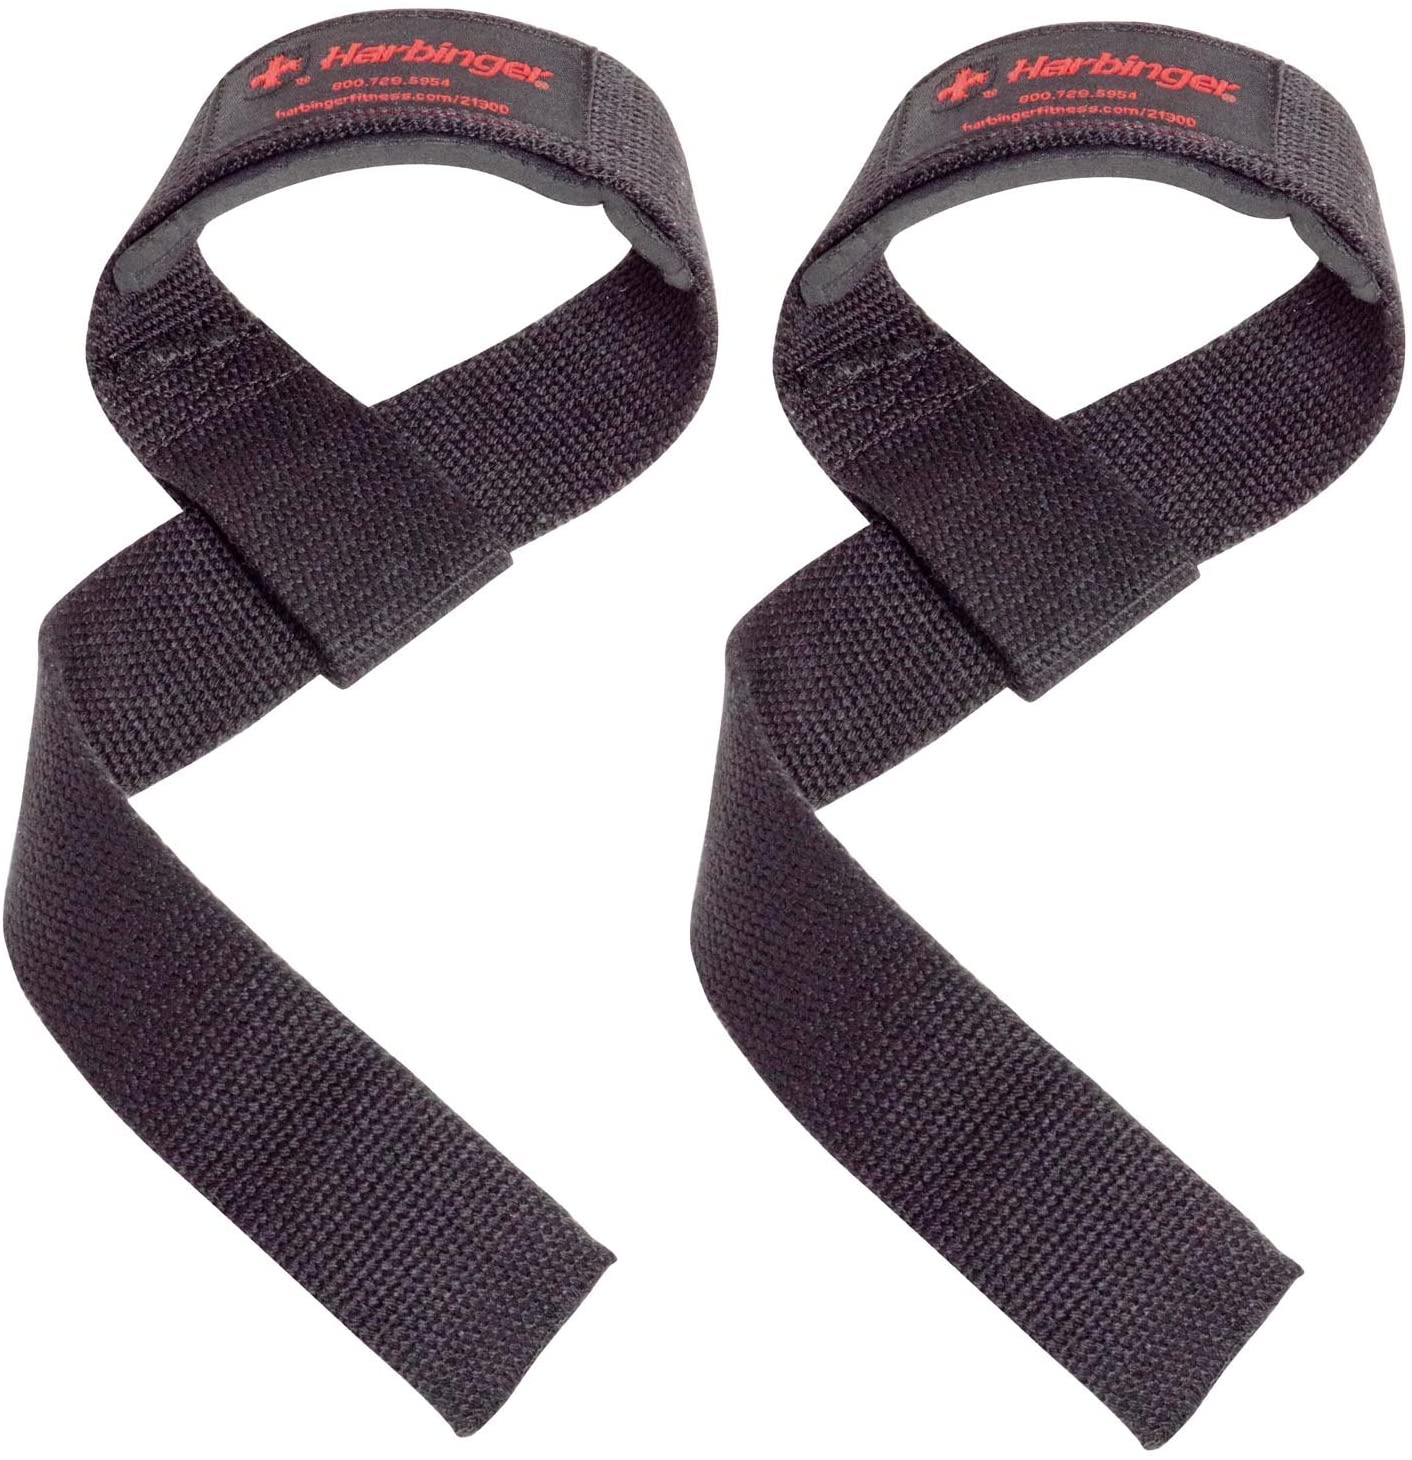 How To Use Harbinger Lifting Straps